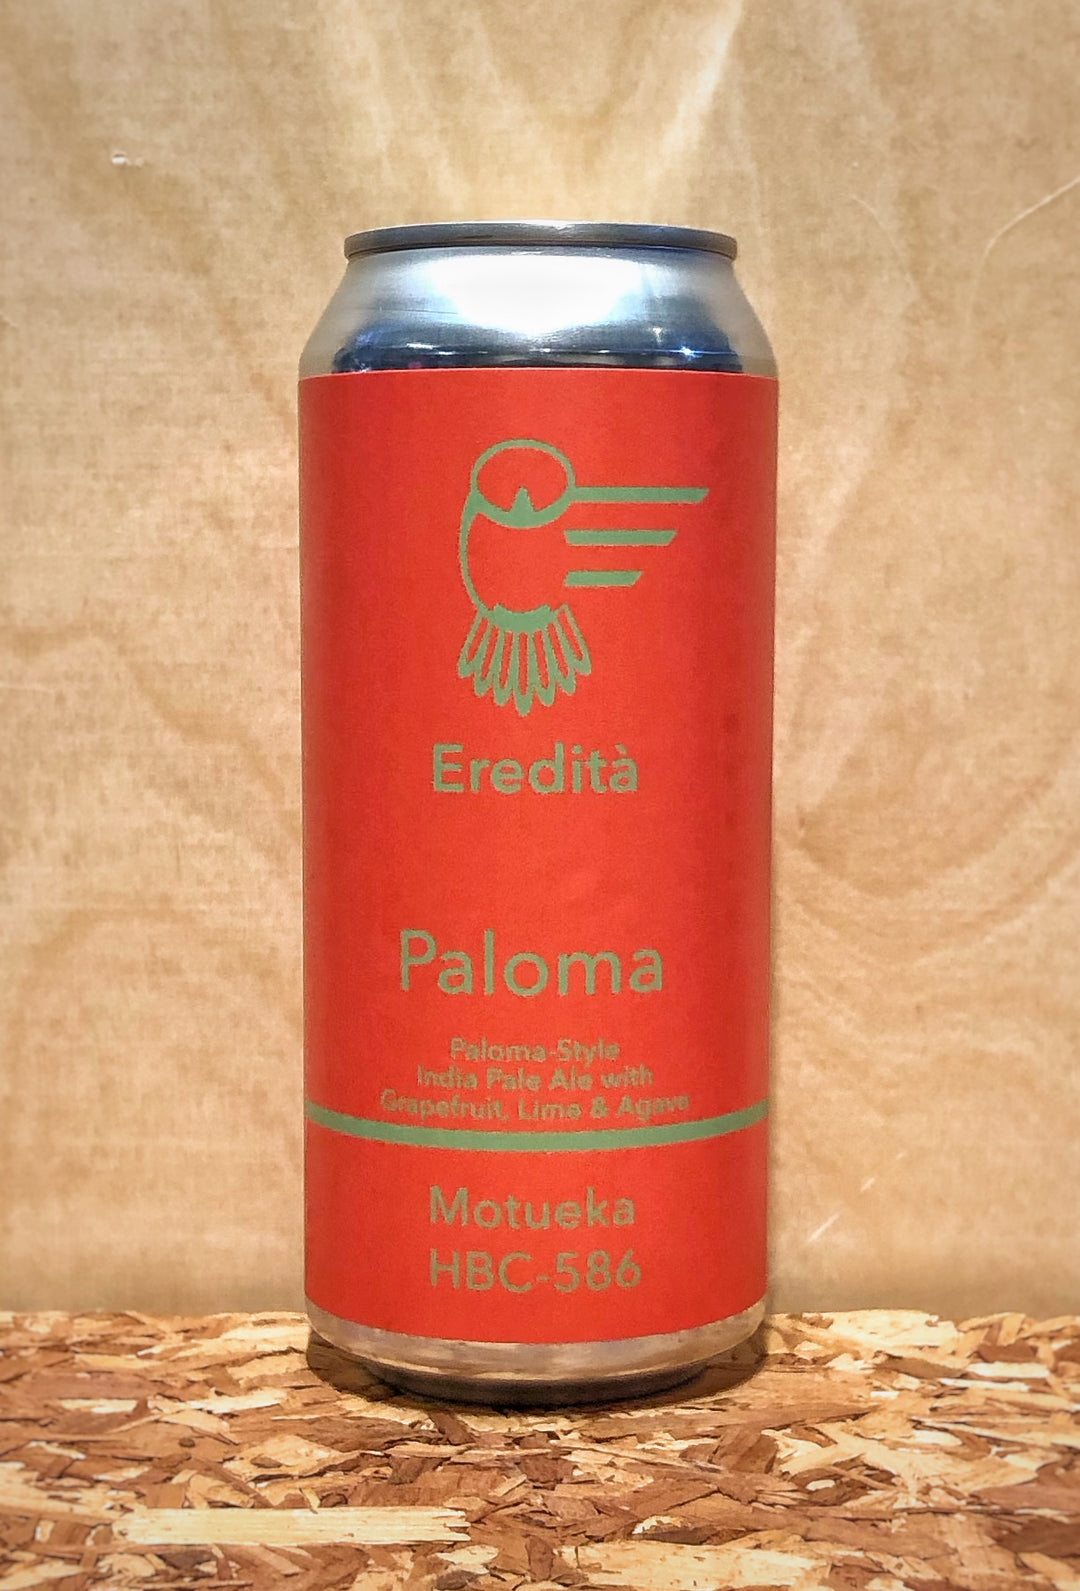 Eredità Paloma-Style IPA with Grapefruit, Lime, & Agave (North Haven, CT)